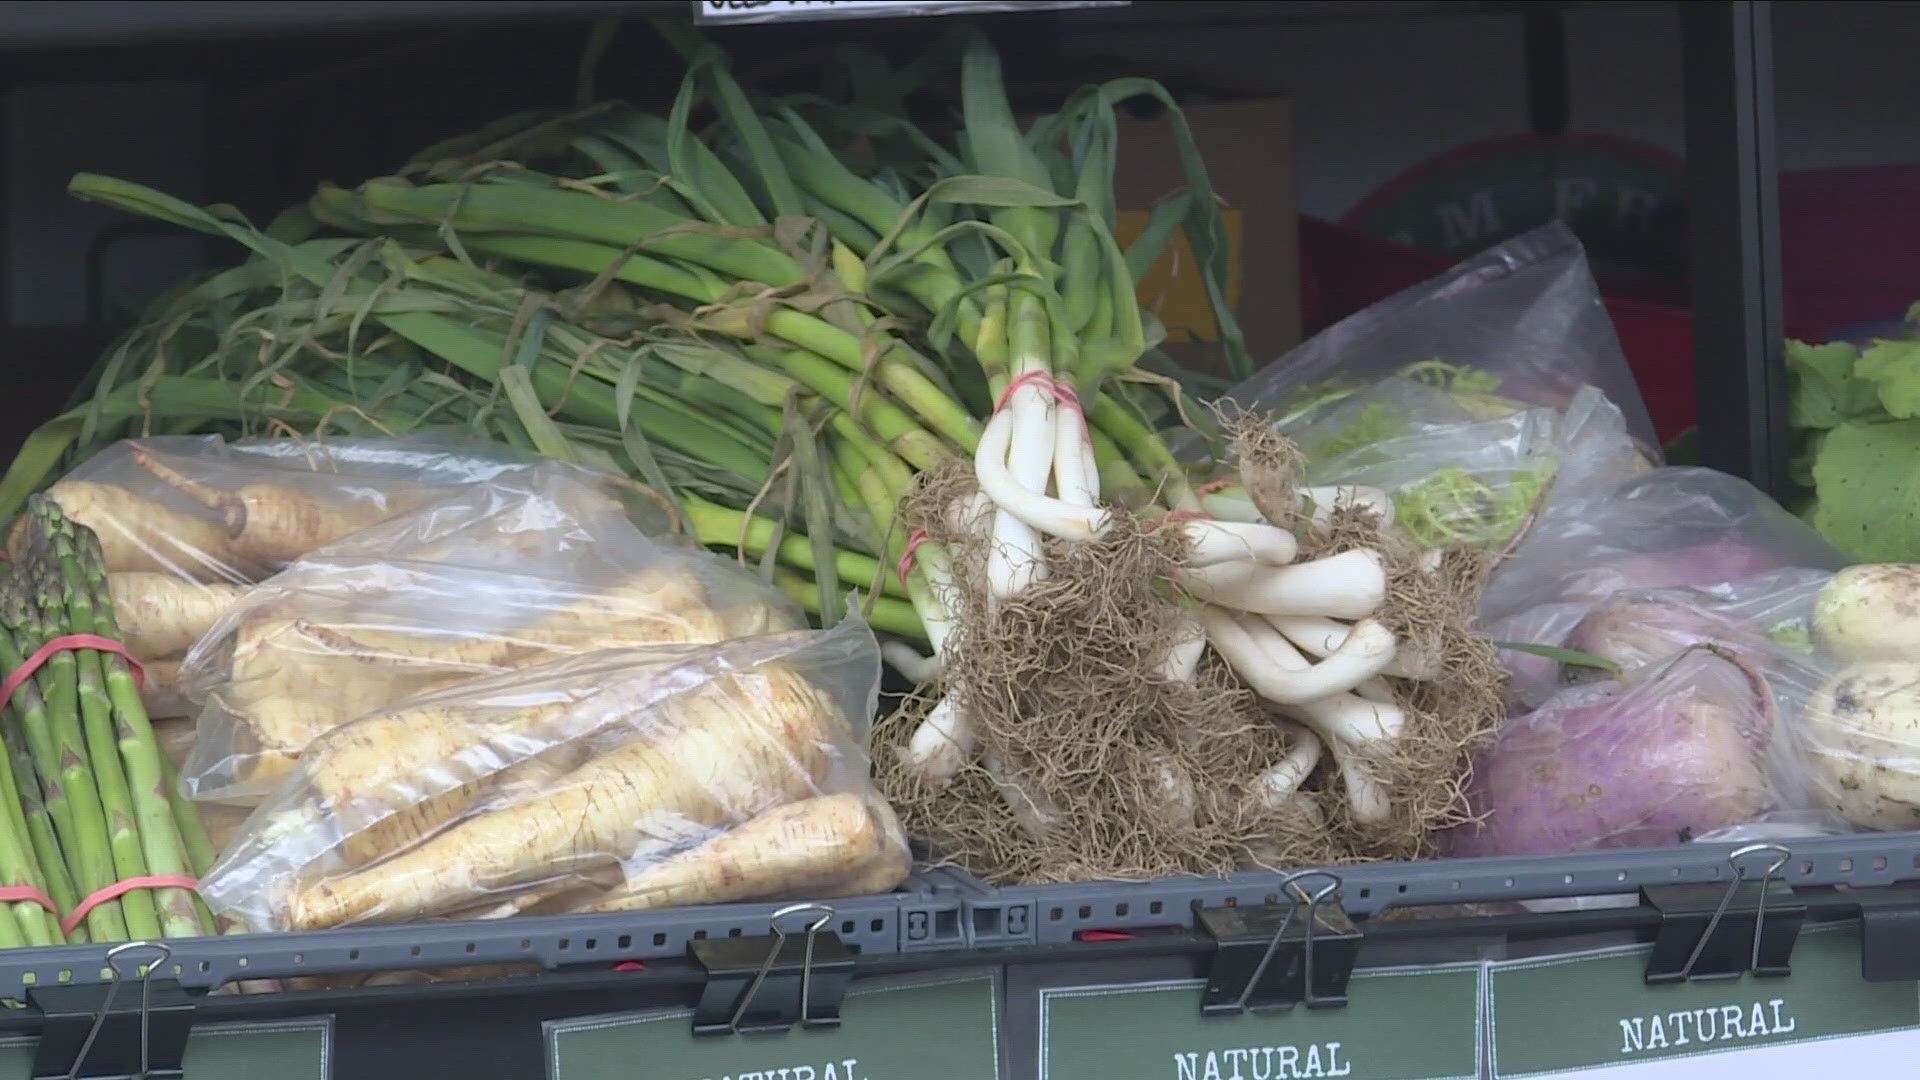 Their markets, where you can buy healthy, local fresh food are also going strong.